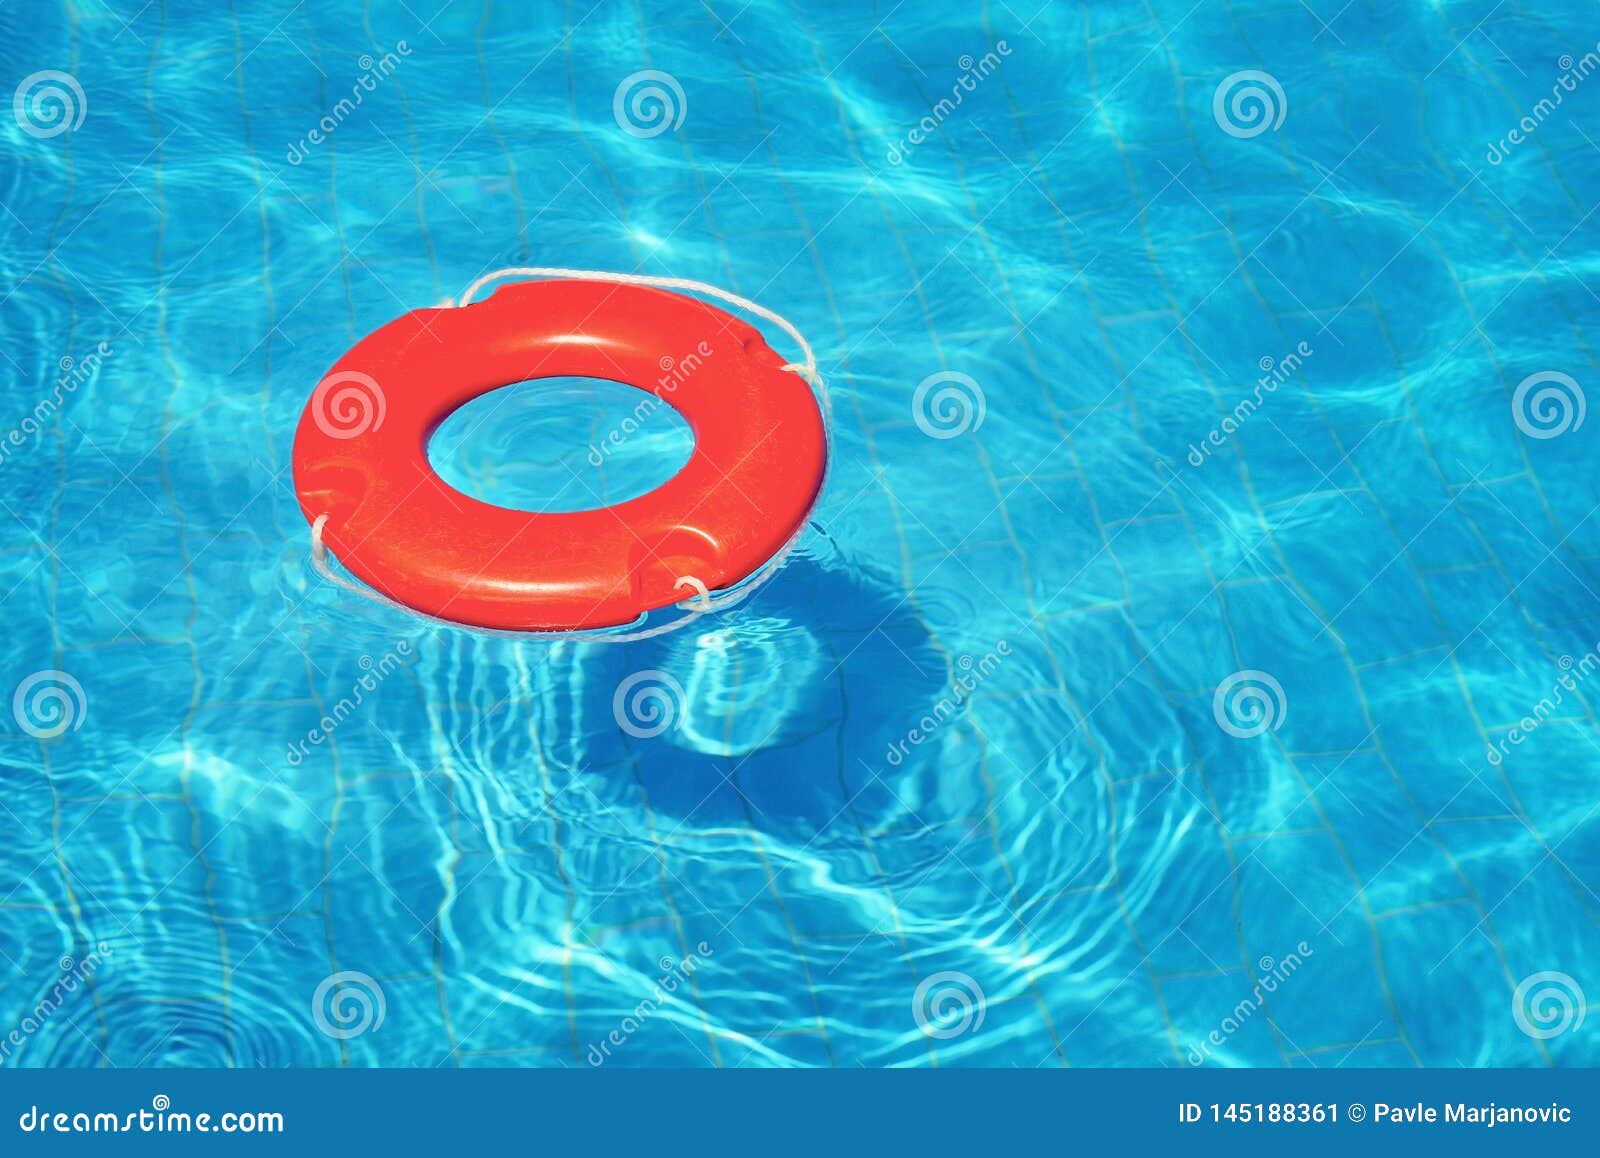 Colorful Lifeguard Tube Floating in Swimming Pool Stock Image - Image ...